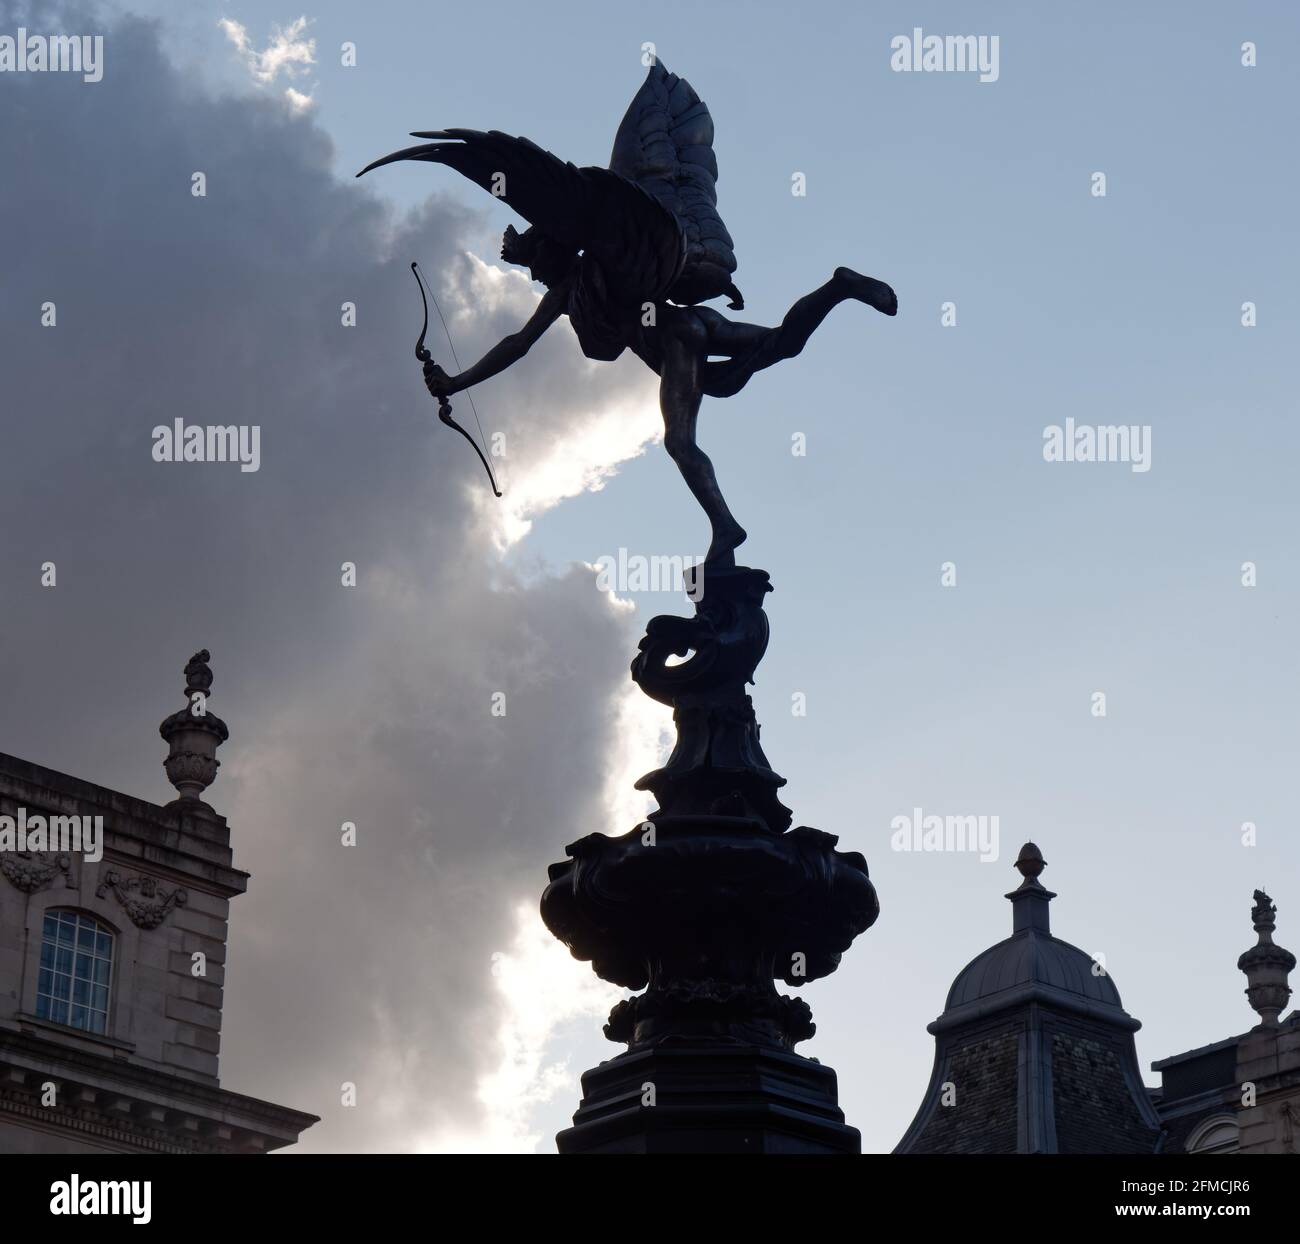 London, Greater London, England - May 04 2021: Statue of Anteros on The Shaftesbury Memorial Fountain often mistakenly called 'Eros' Stock Photo